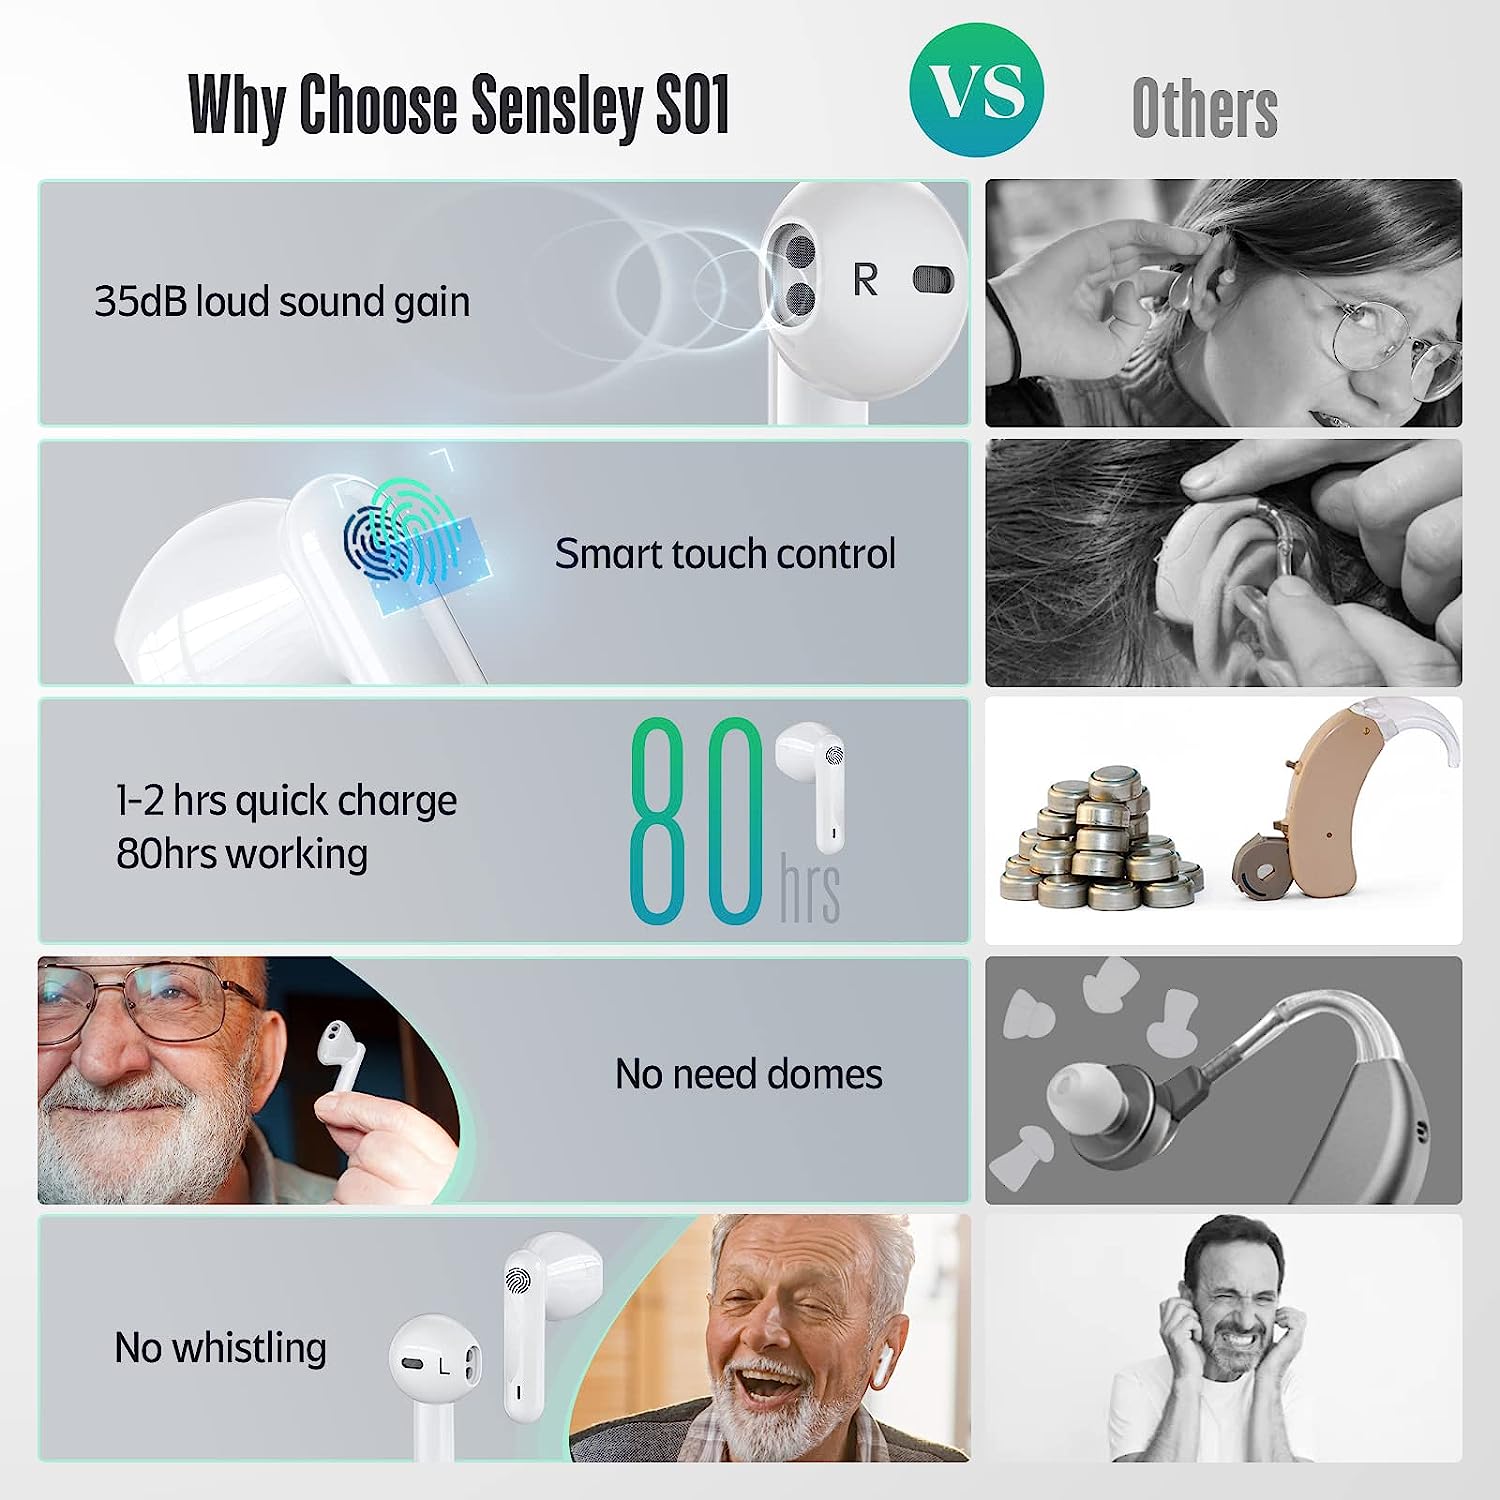 Sensley S01 Hearing Aids-headphone design, patented design for best fitting, no need for ear domes, no whistling, rechargeable and fast charging, smart touch control（color: white)）